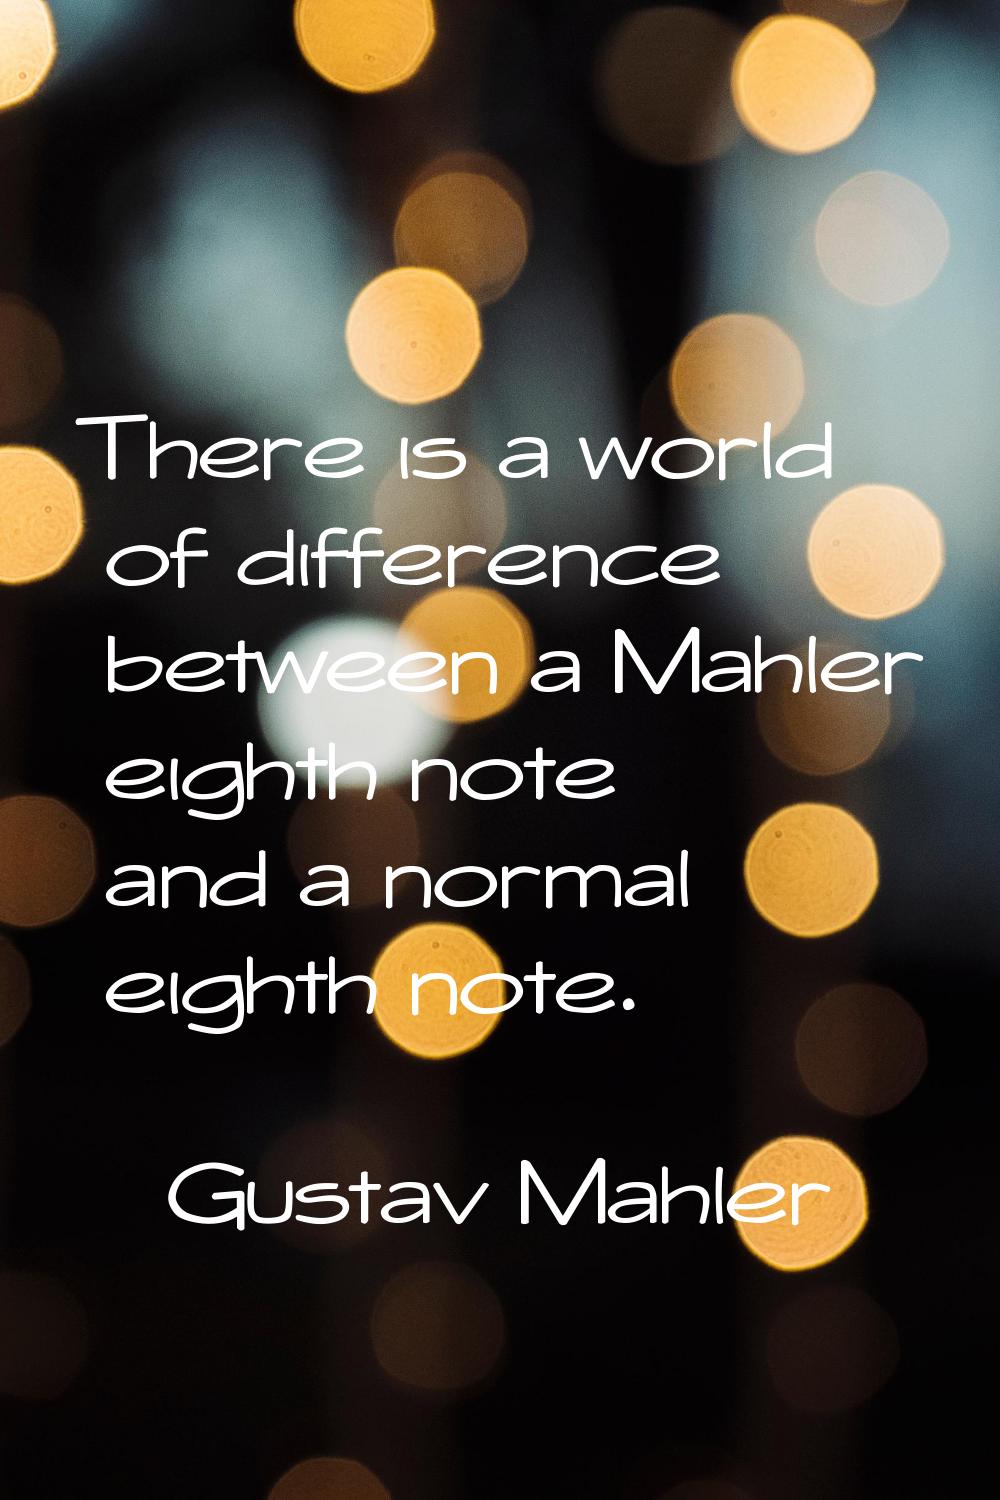 There is a world of difference between a Mahler eighth note and a normal eighth note.